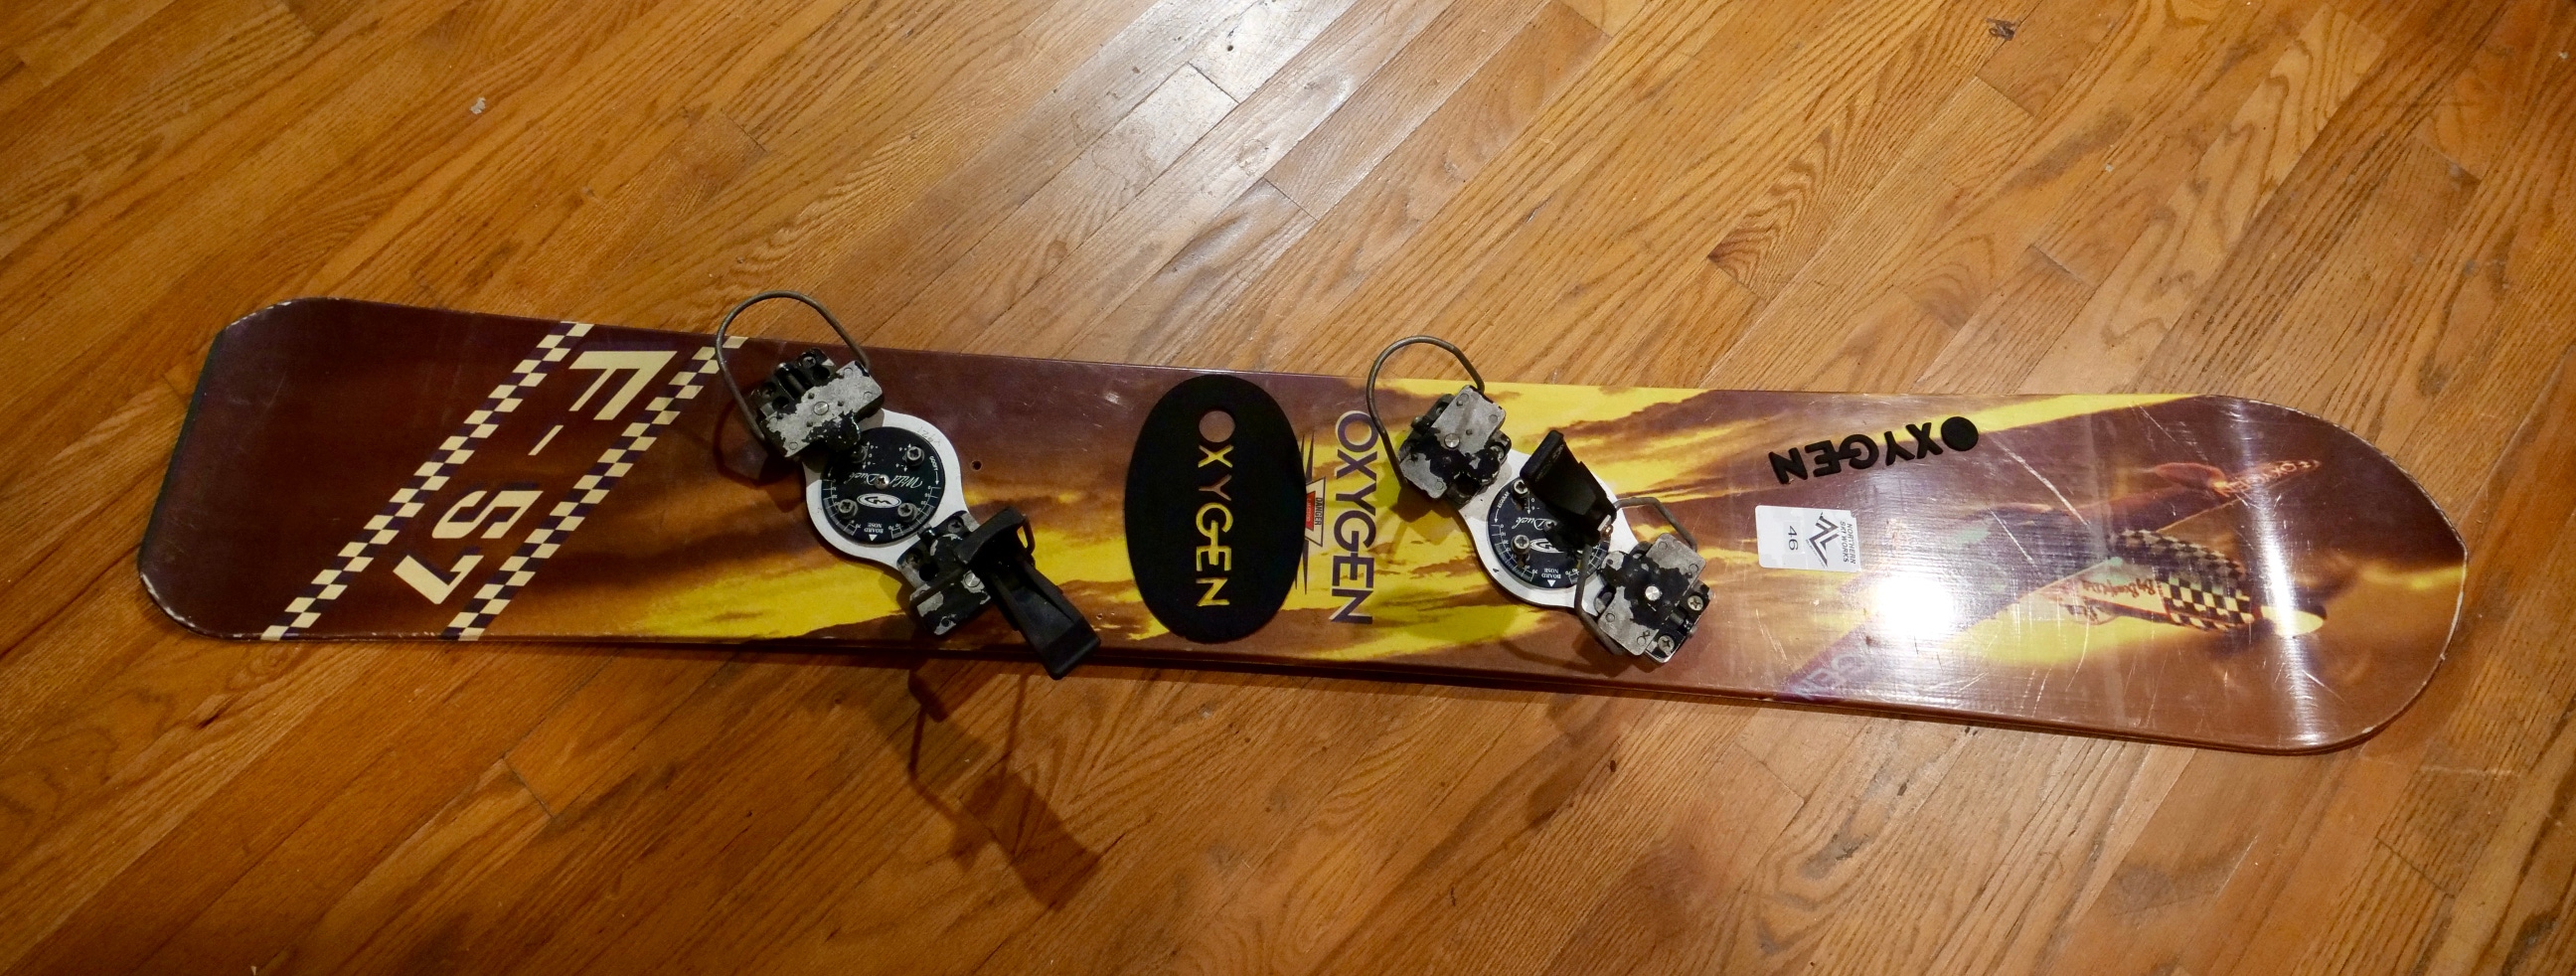 Used Men's Oxygen F-57 Carving Snowboard All Mountain With Bindings Very Stiff Directional 155cm